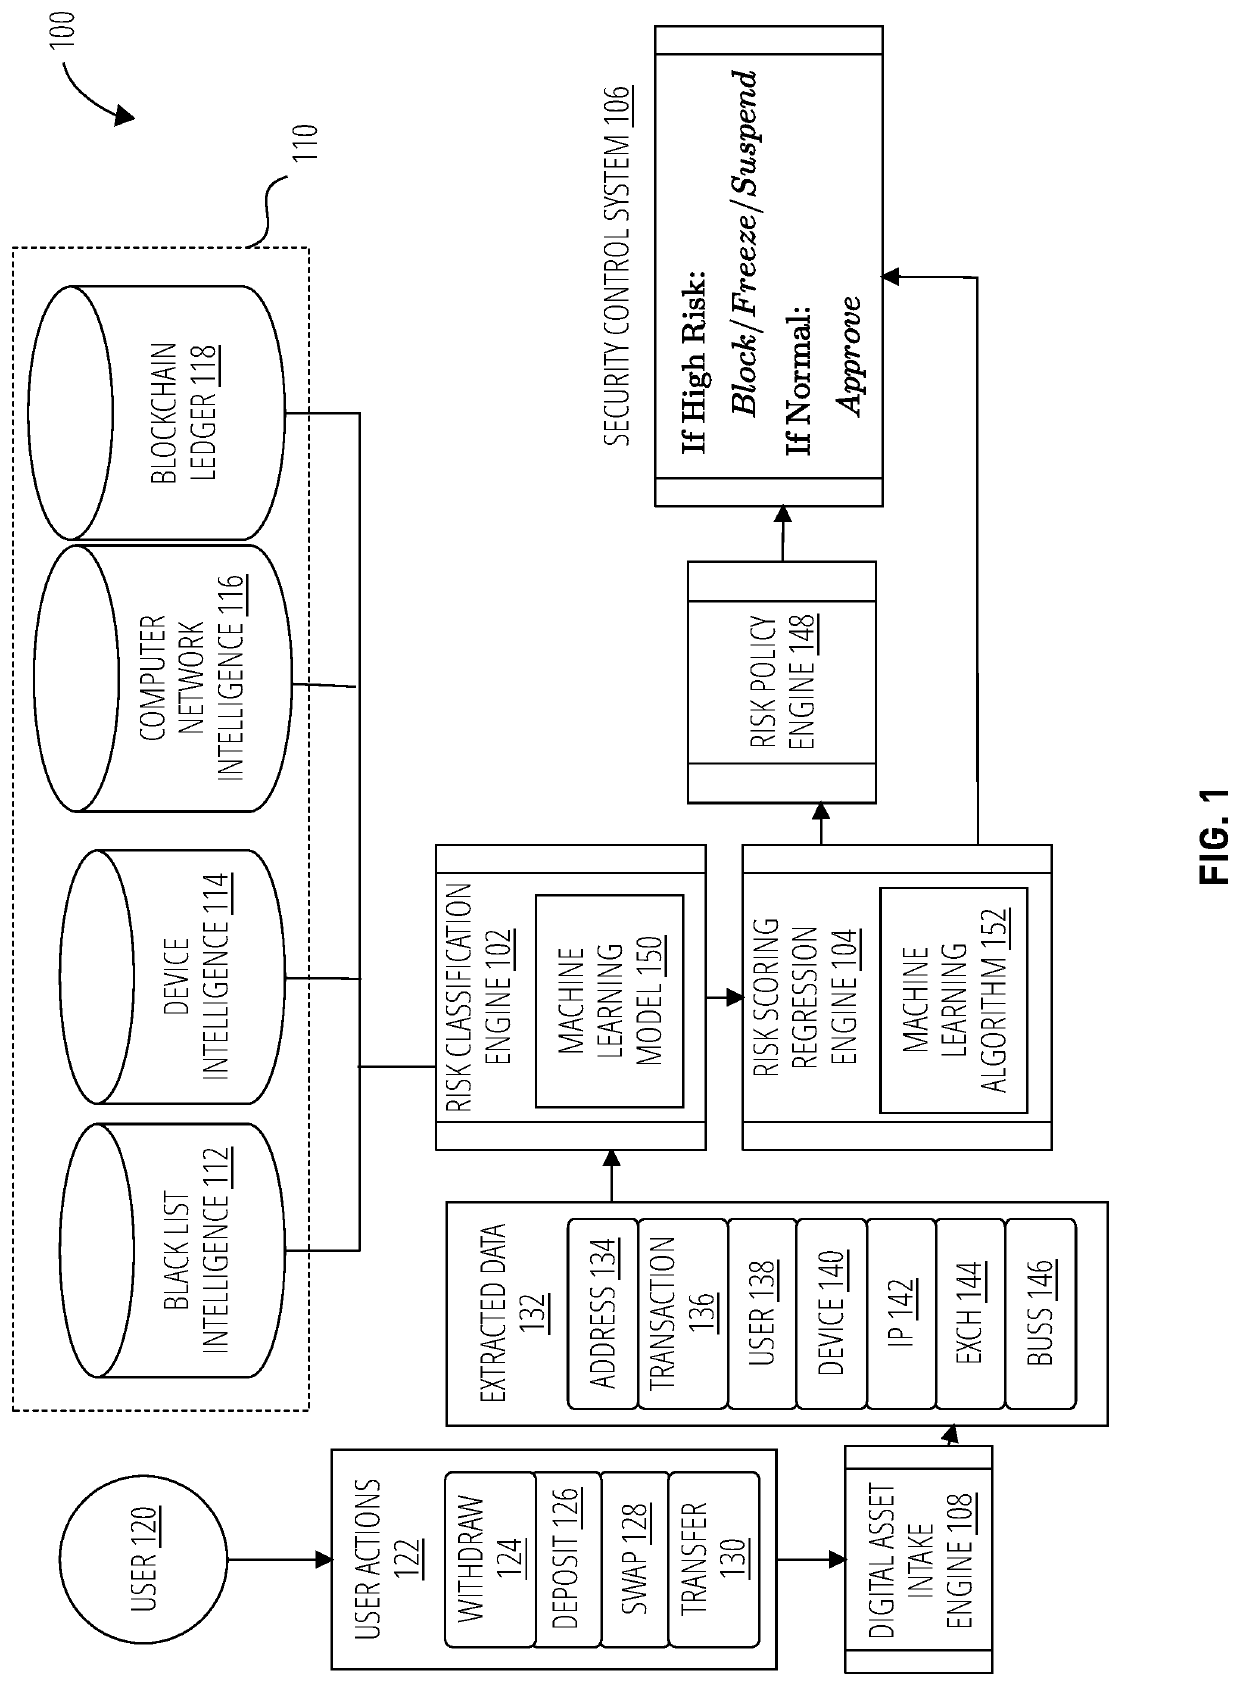 System and method for blockchain transaction risk management using machine learning